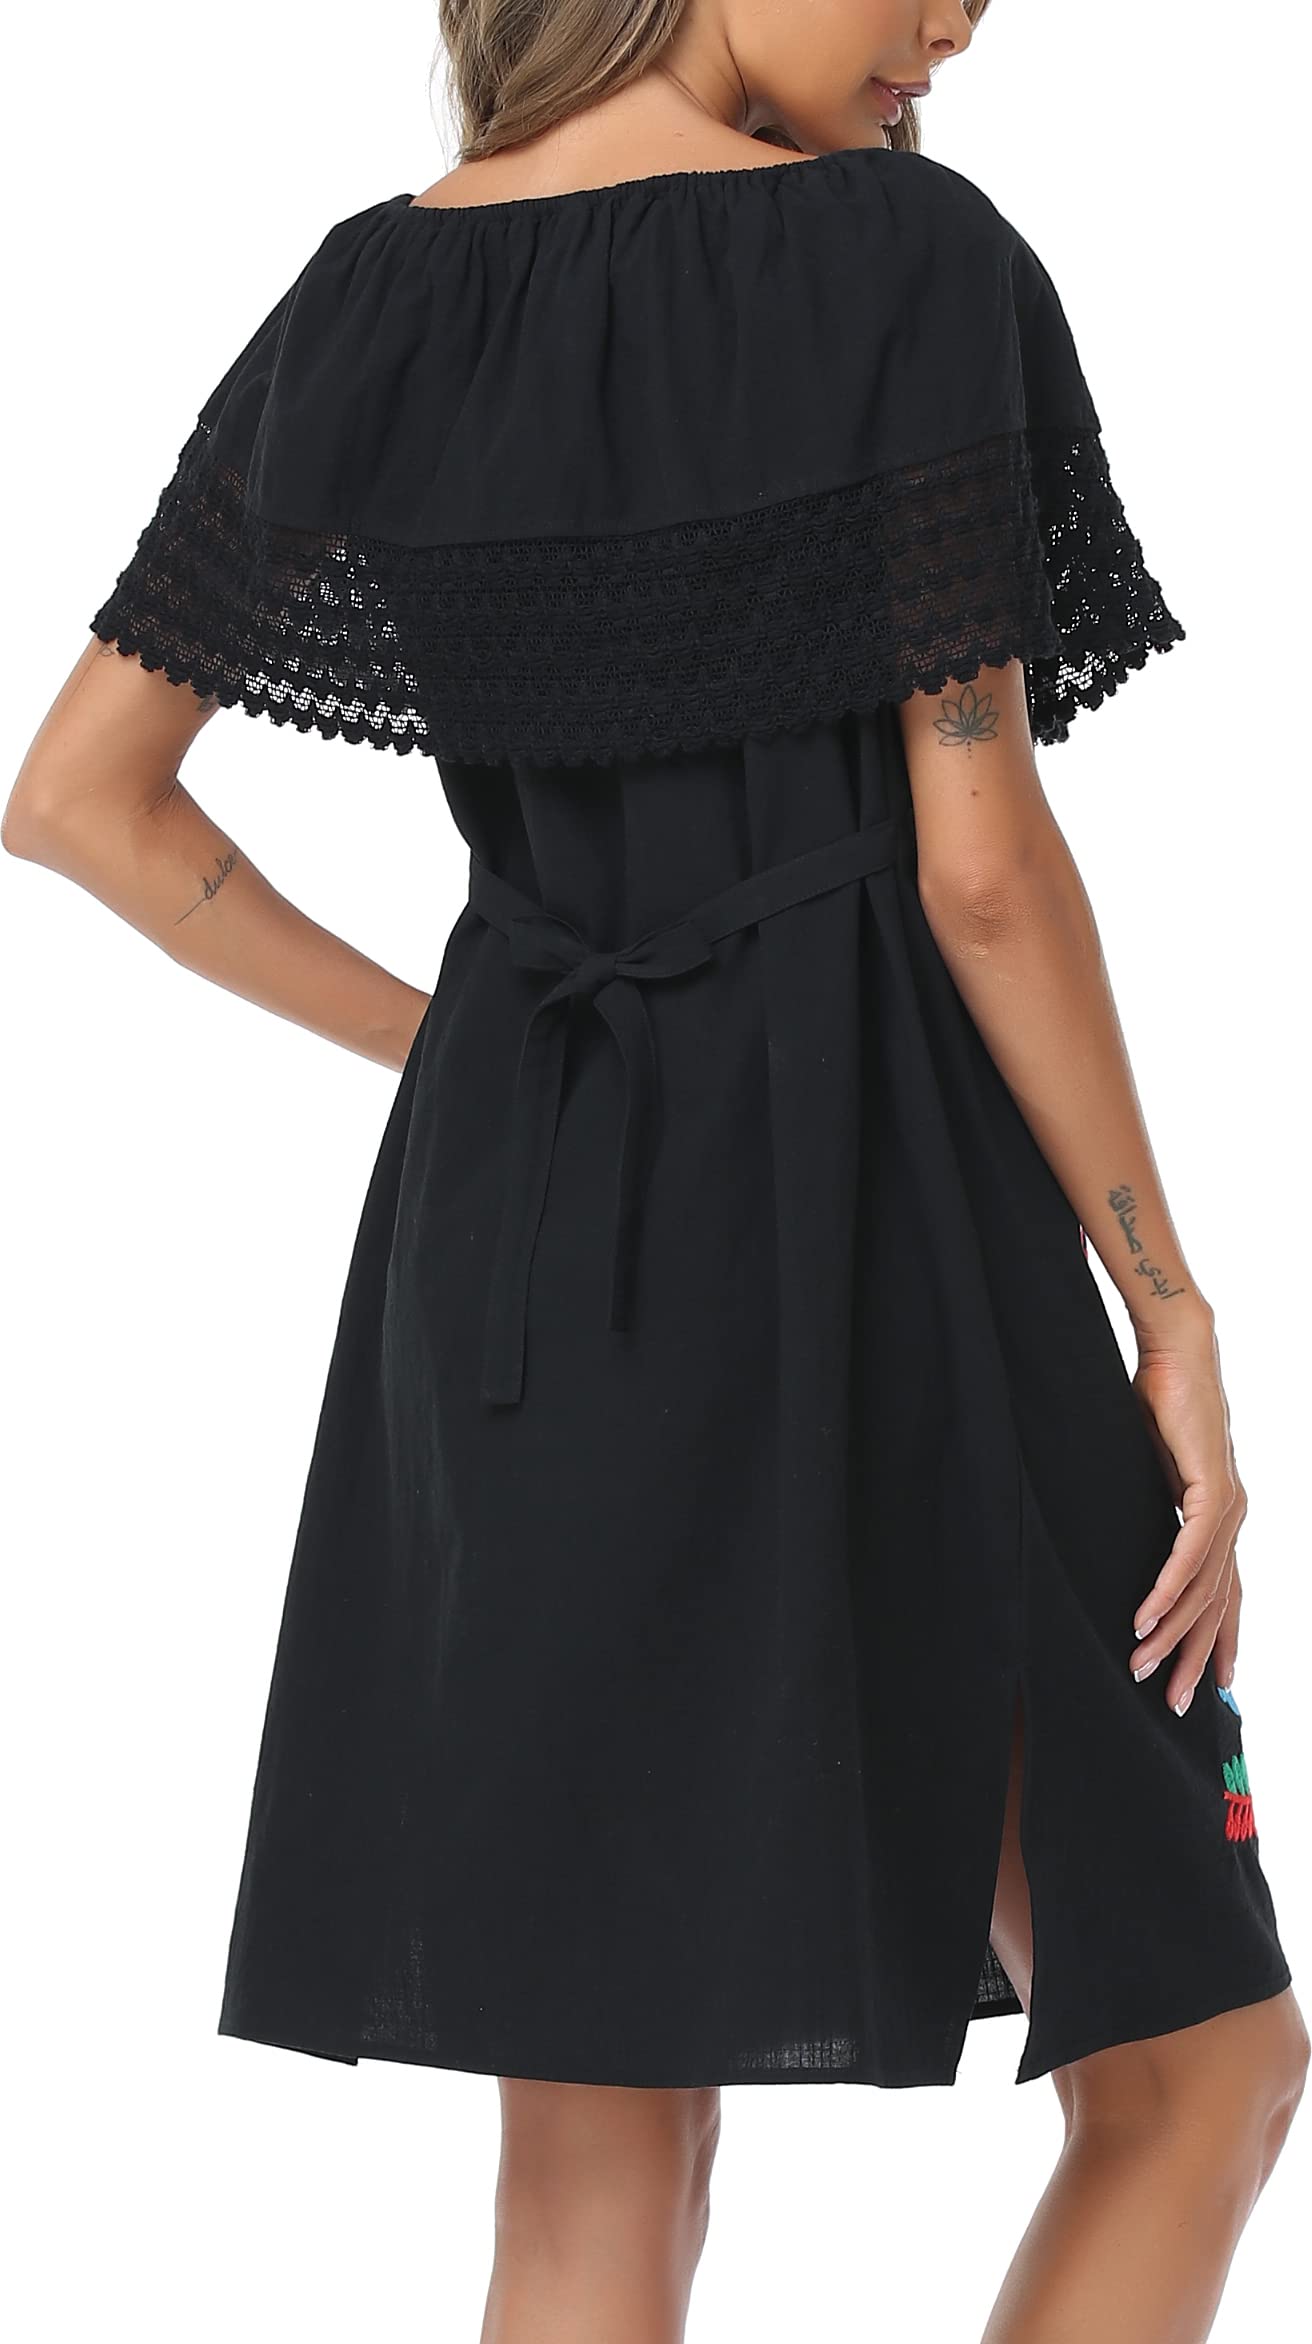 YZXDORWJ Women Embroidered Mexican Present Lace Off-Shoulder Dress